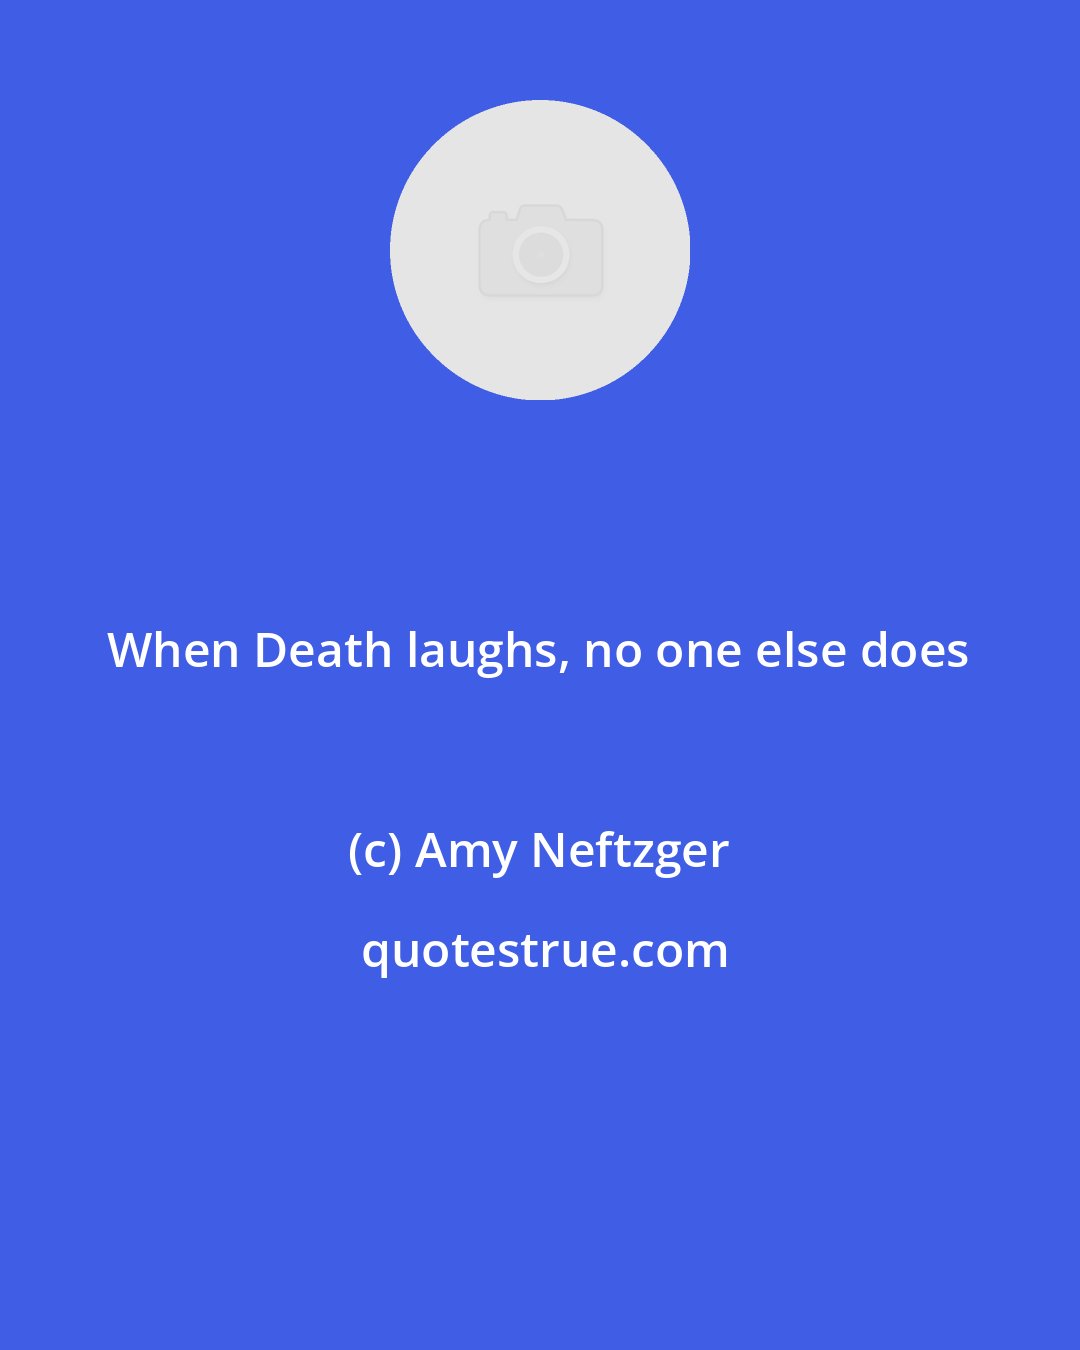 Amy Neftzger: When Death laughs, no one else does